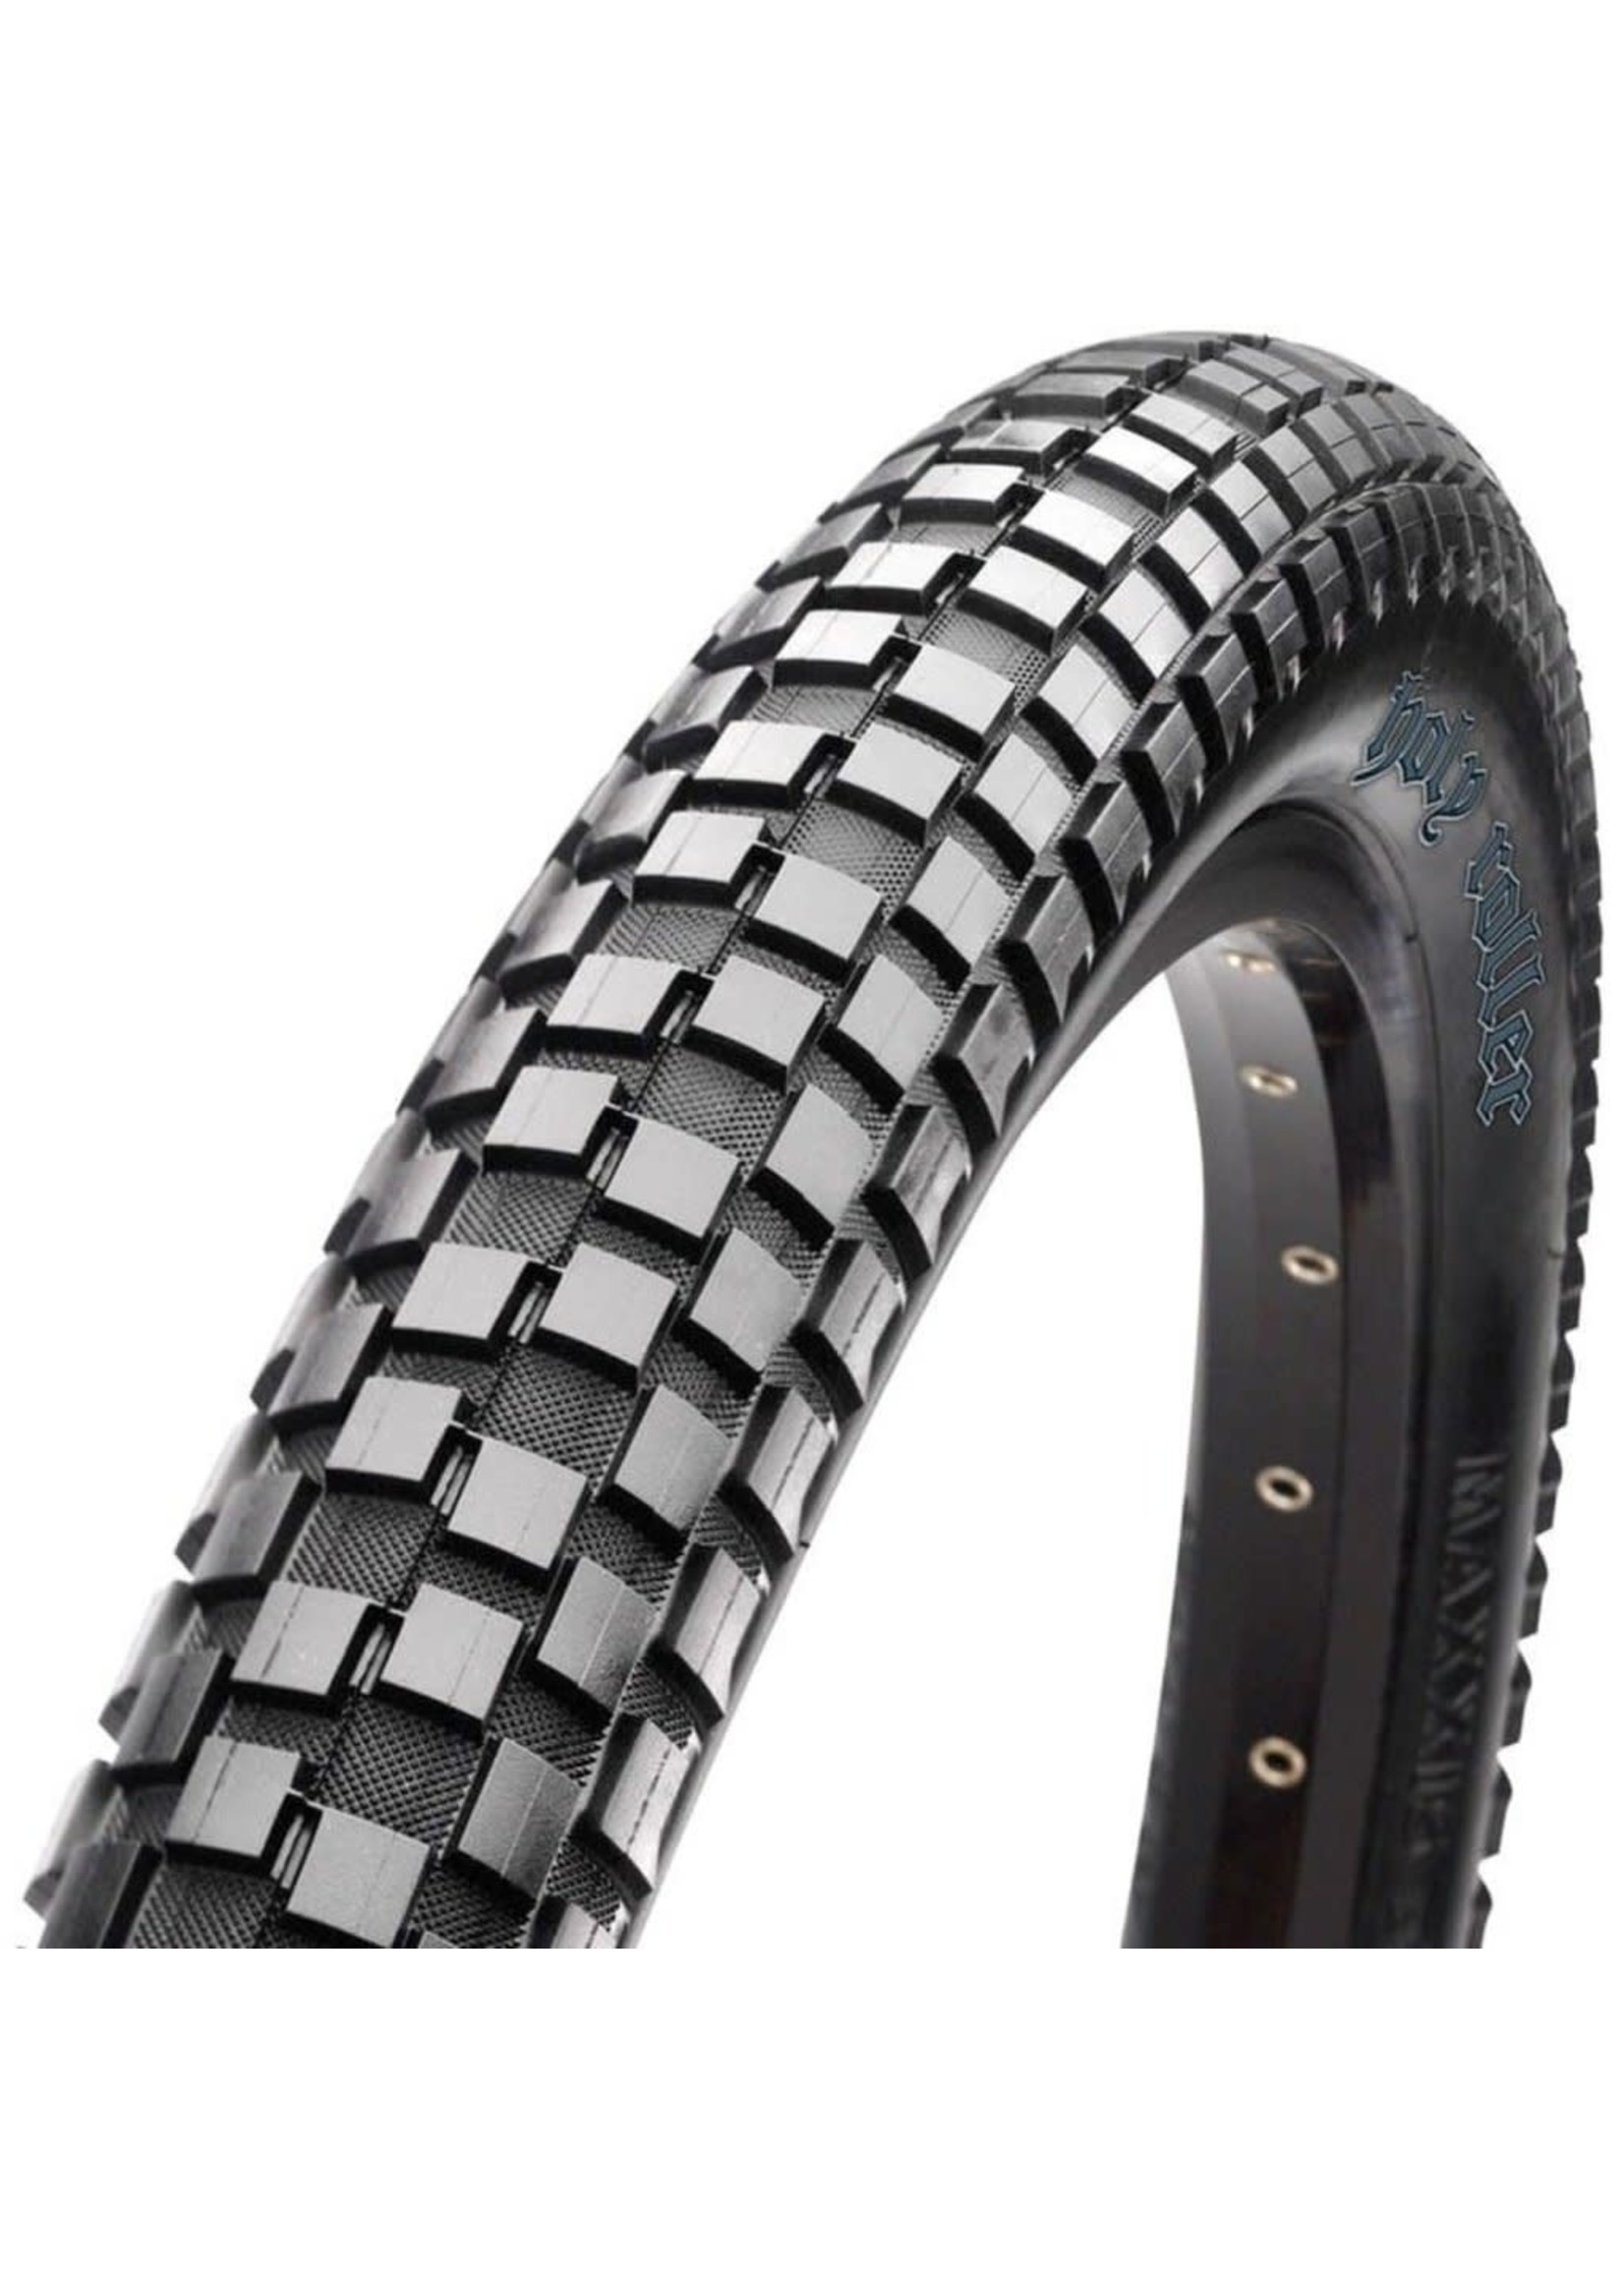 Maxxis Maxxis Holy Roller Tire - 26 x 2.2, Clincher, Wire, Black, Single